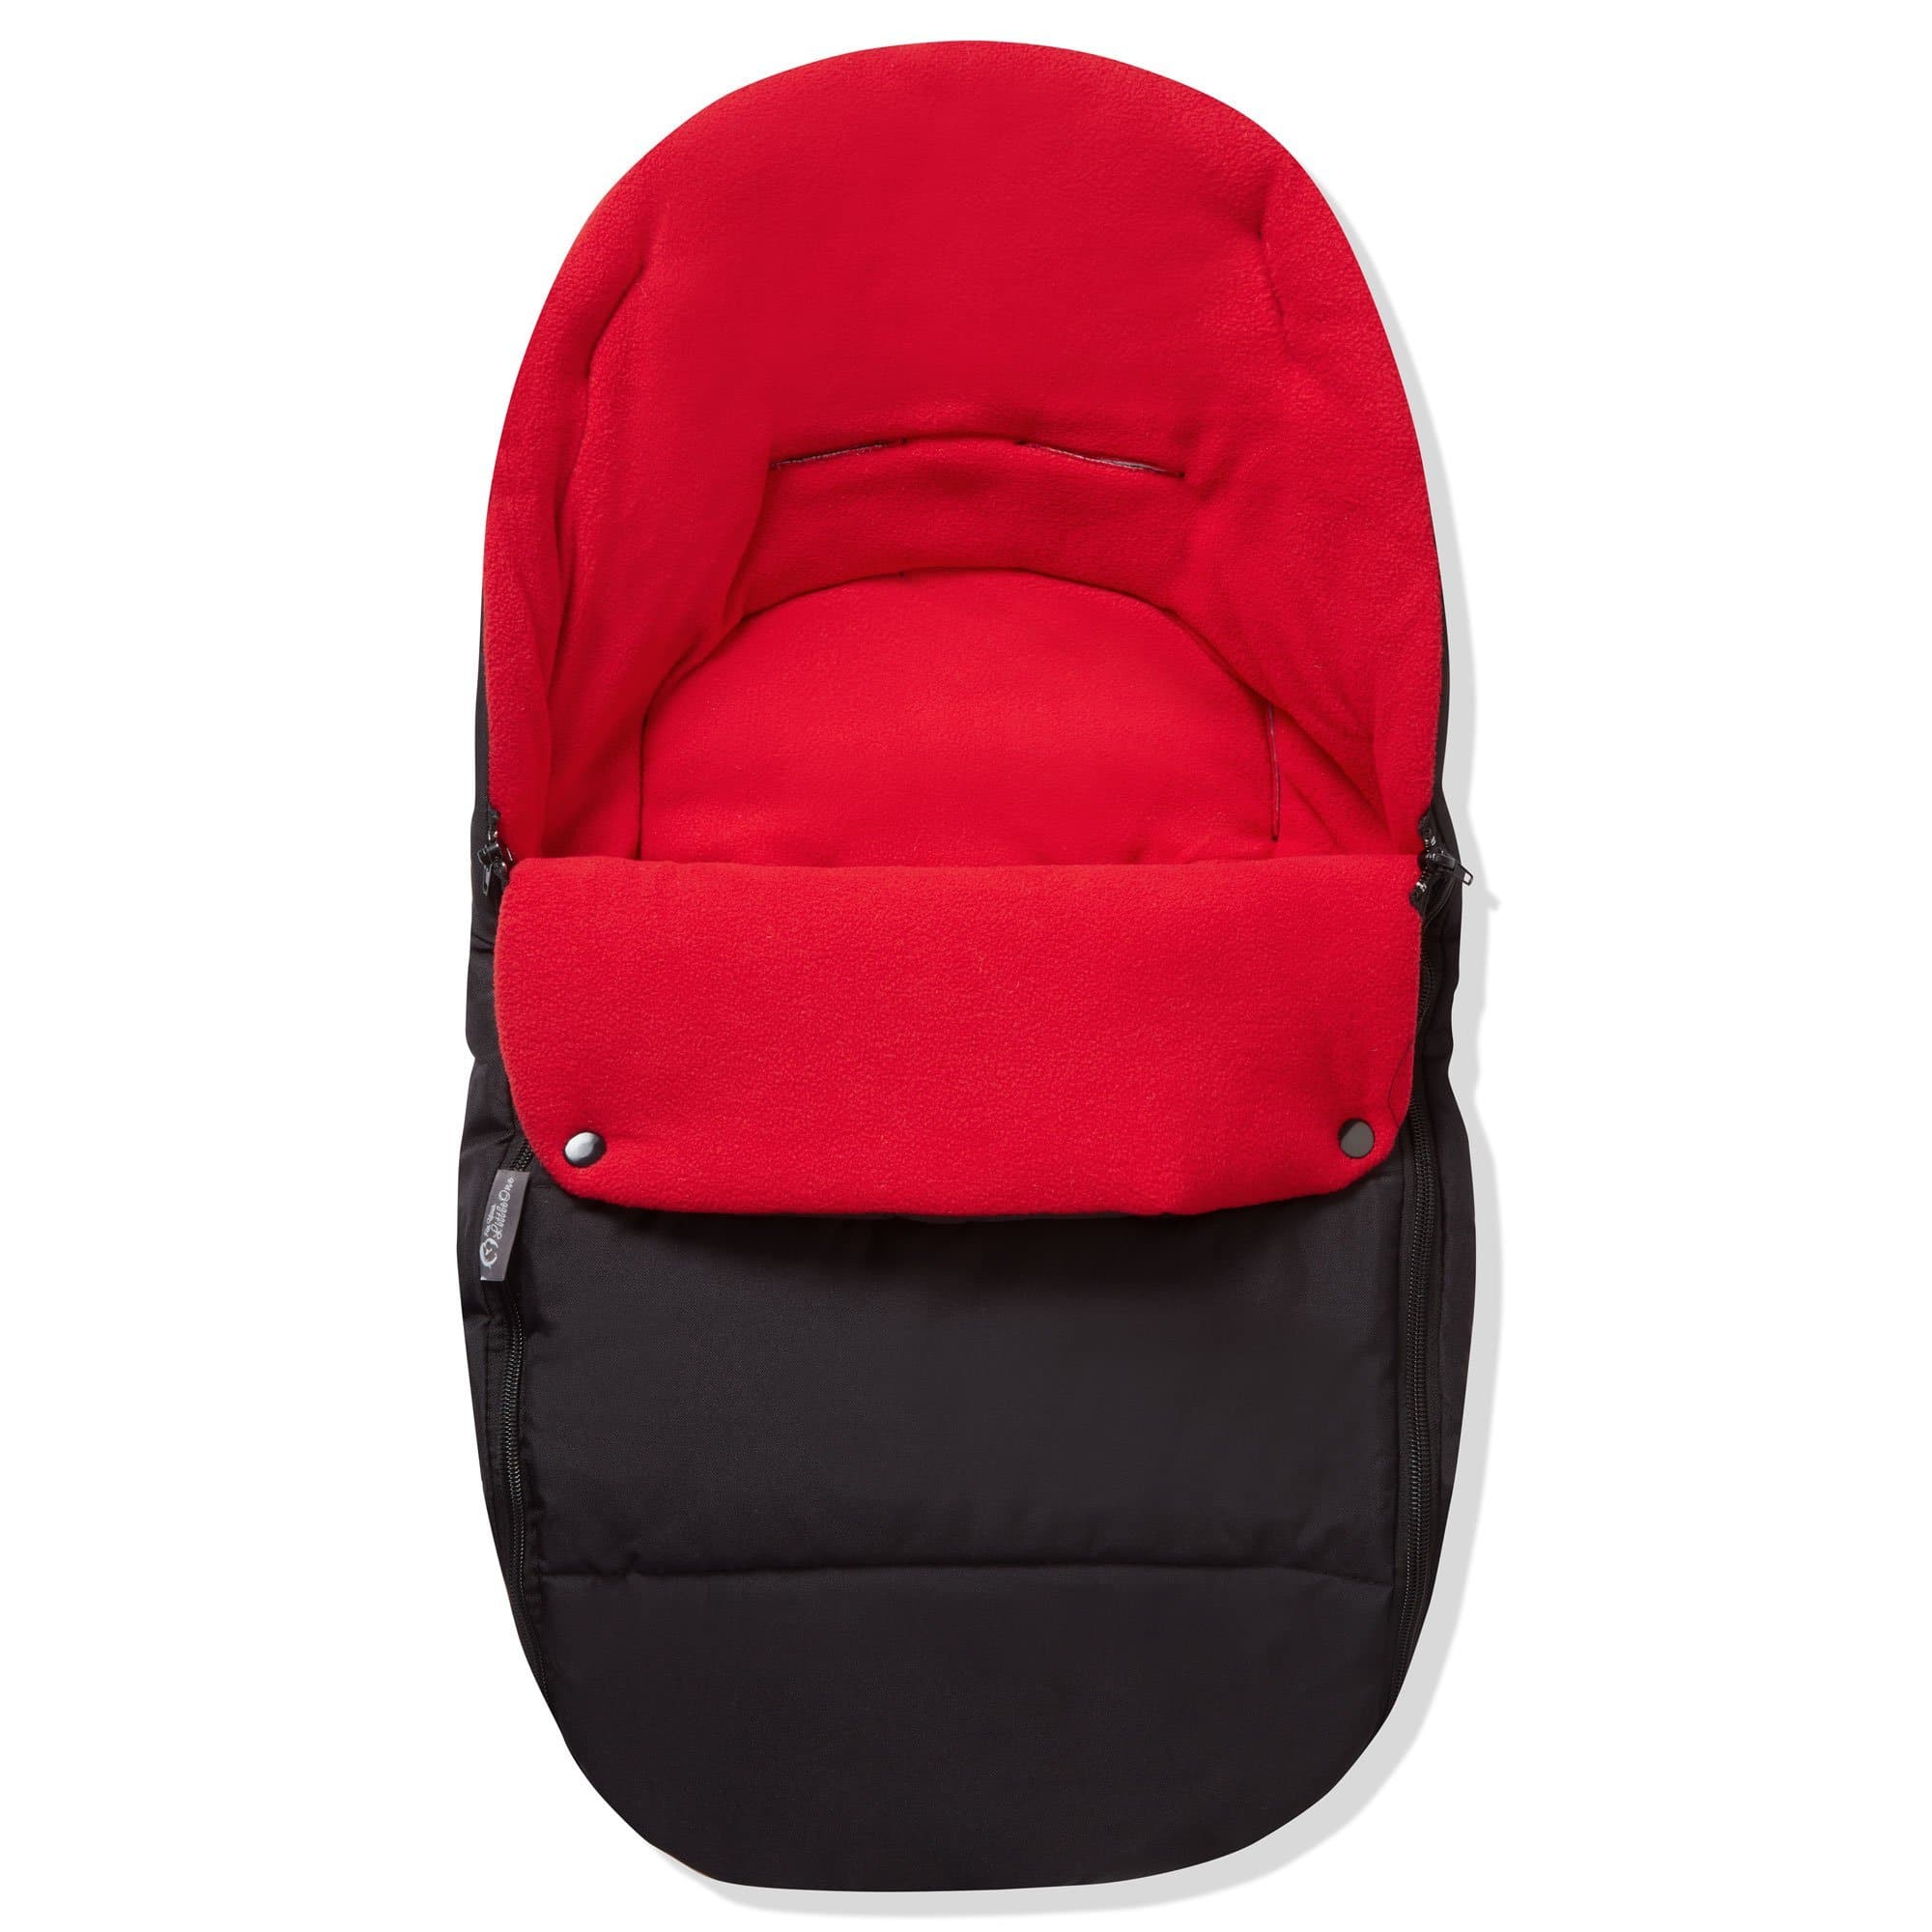 Premium Car Seat Footmuff / Cosy Toes Compatible with Kinderkraft - For Your Little One